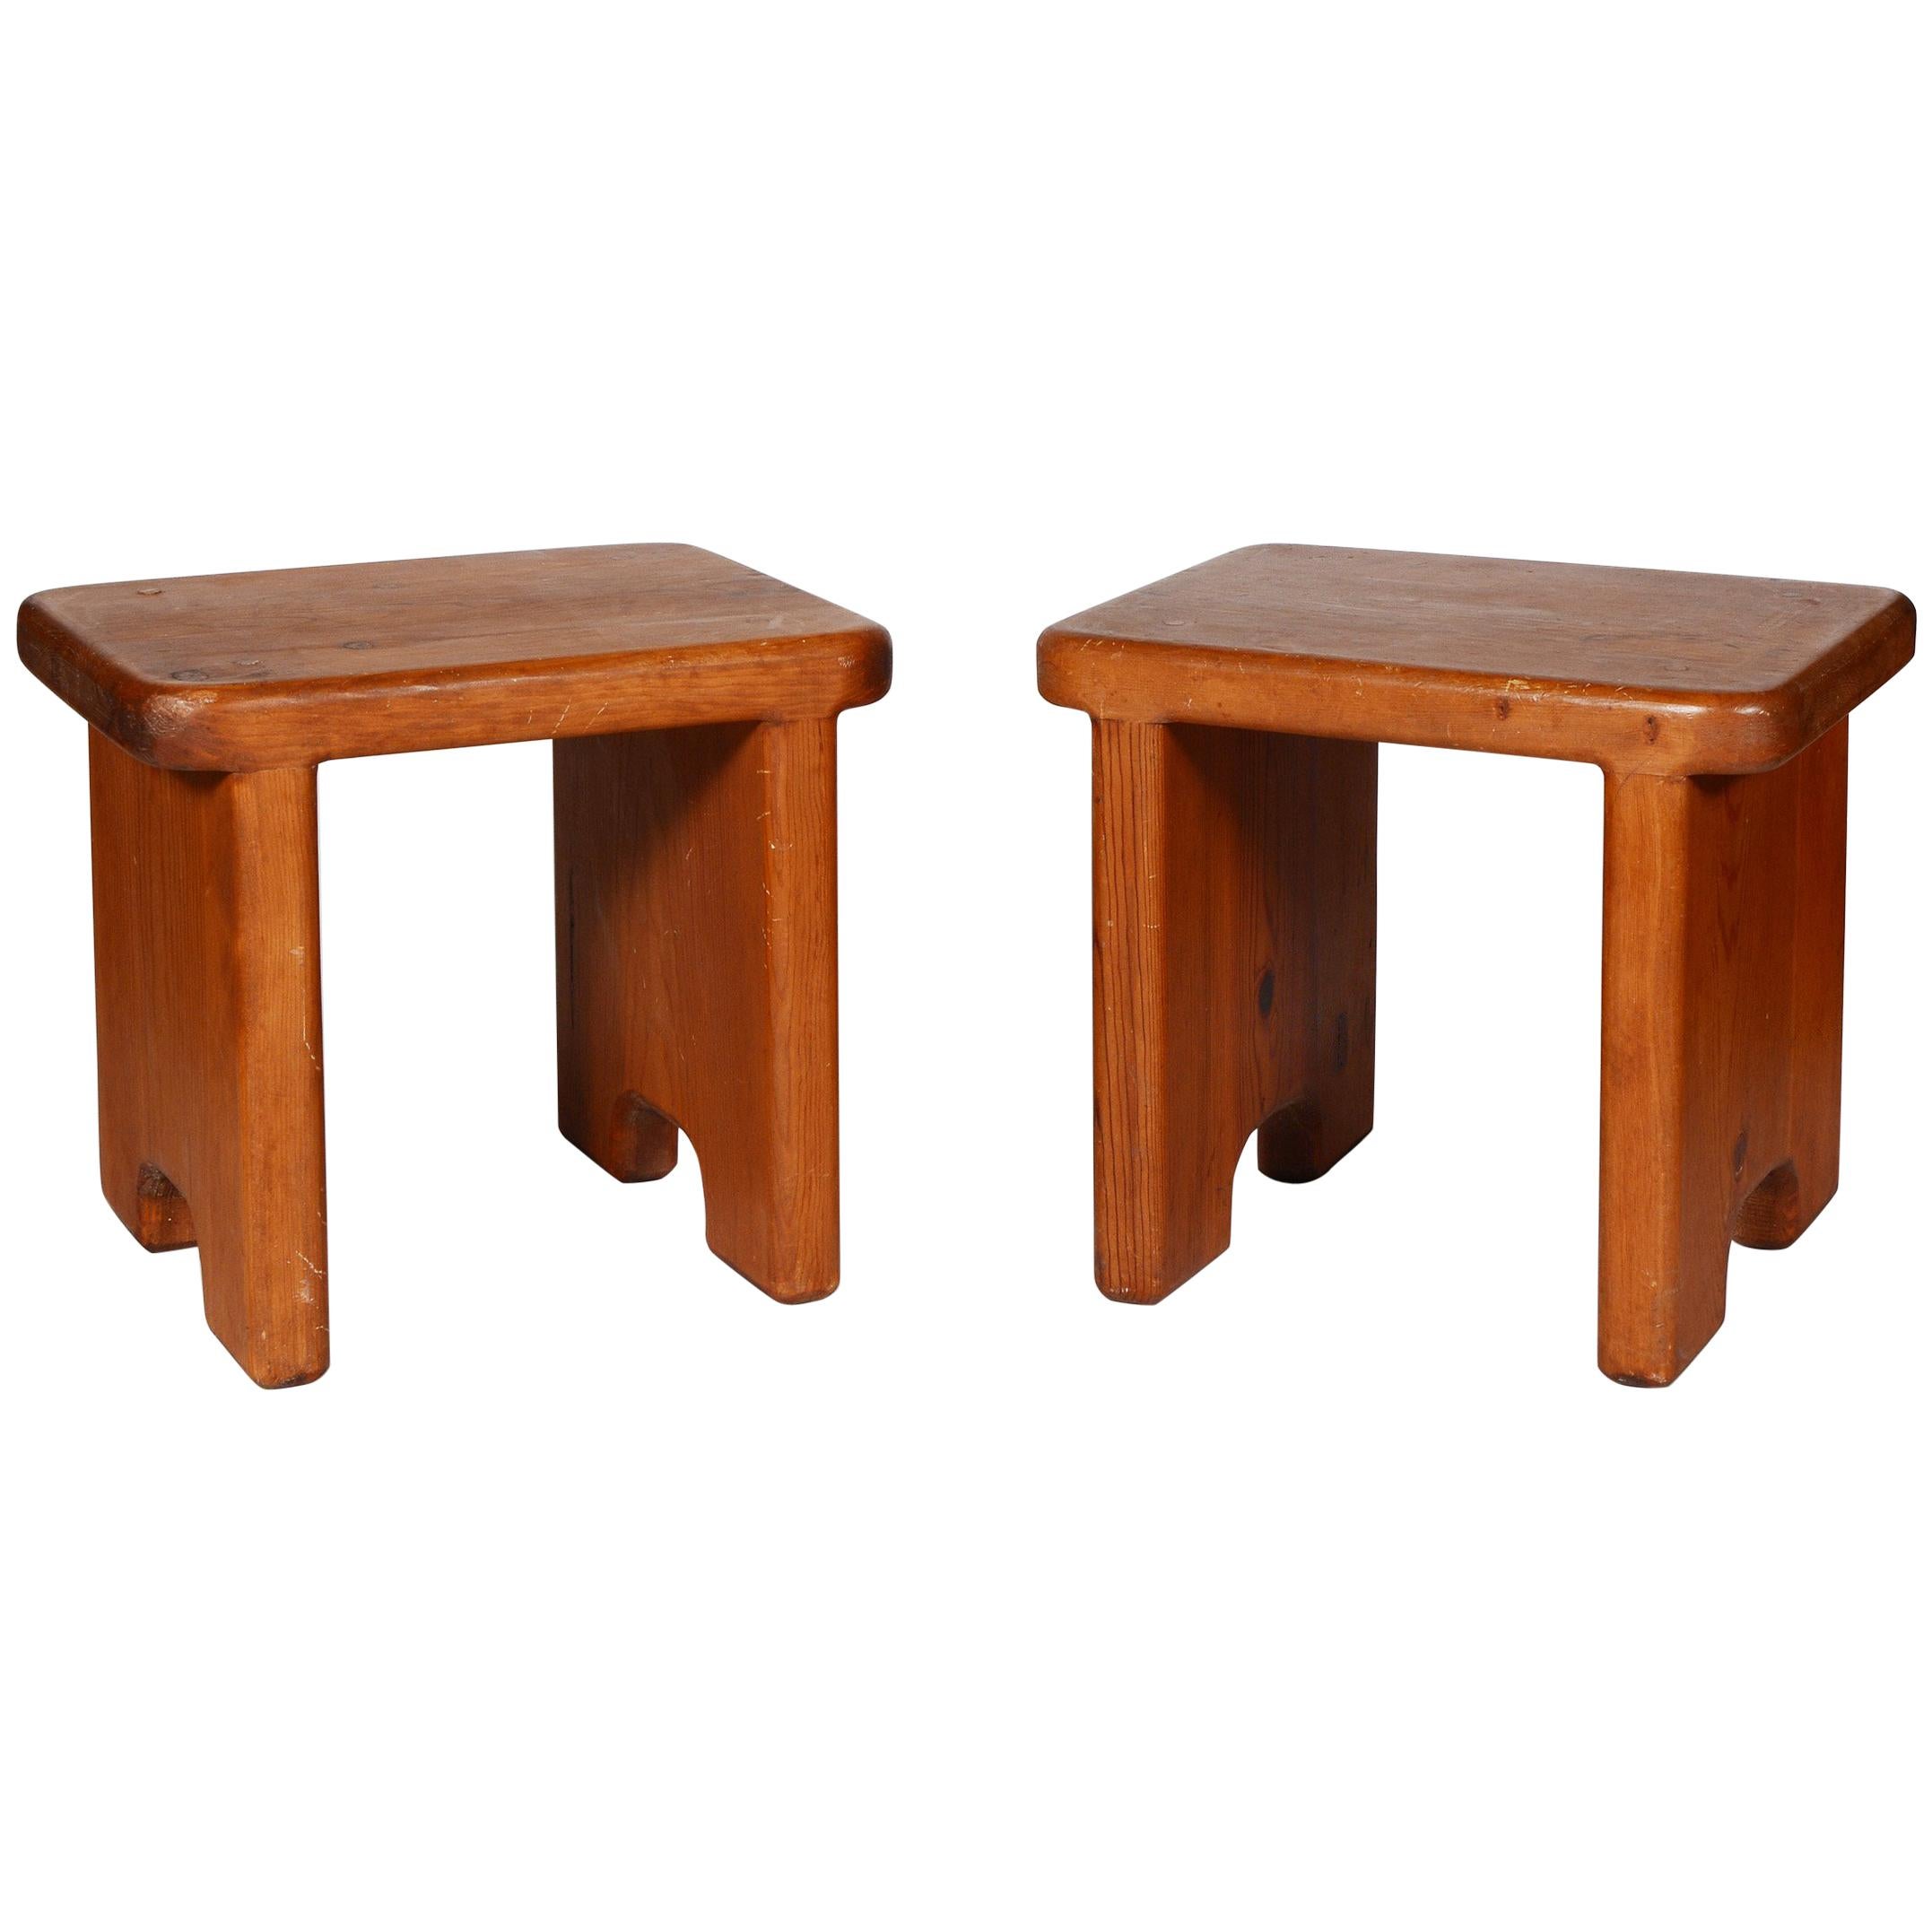 Pair of Handcrafted California Modernist Stools